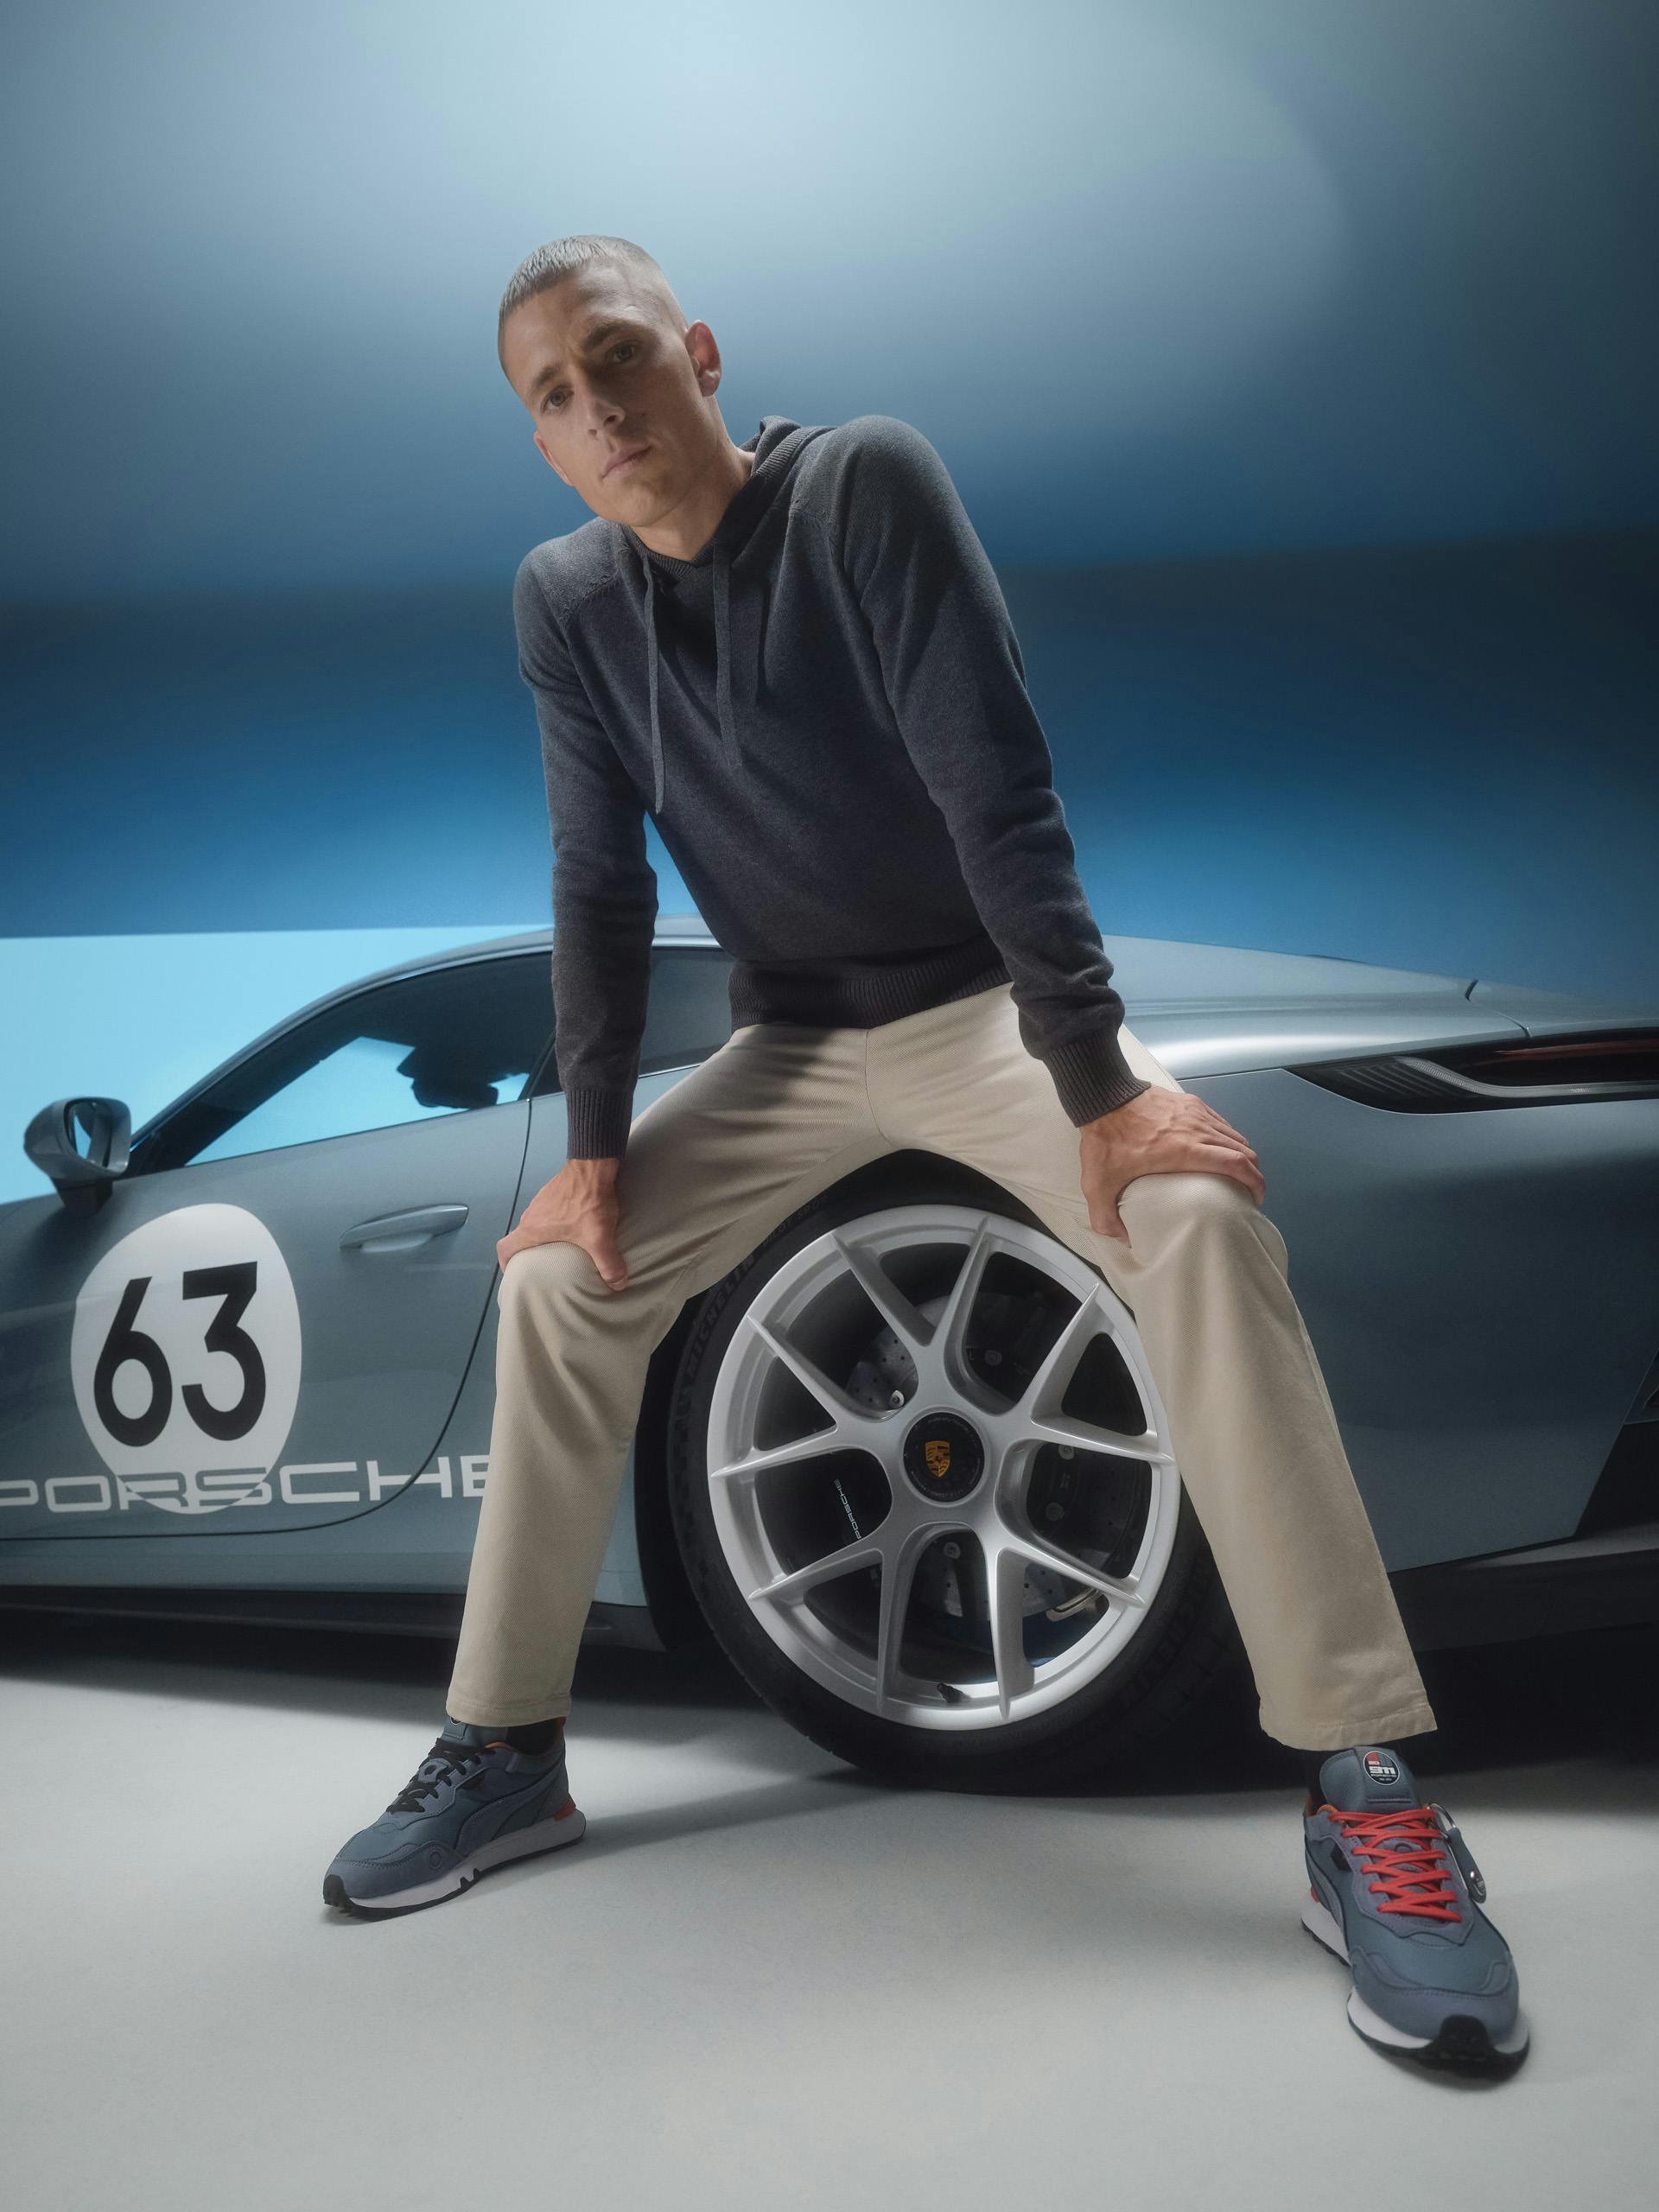 A man in brown trousers, a dark blue sweatshirt and blue Puma sneakers can be seen sitting on the tyre of the 911 Carrera S/T, looking head-on into the camera.